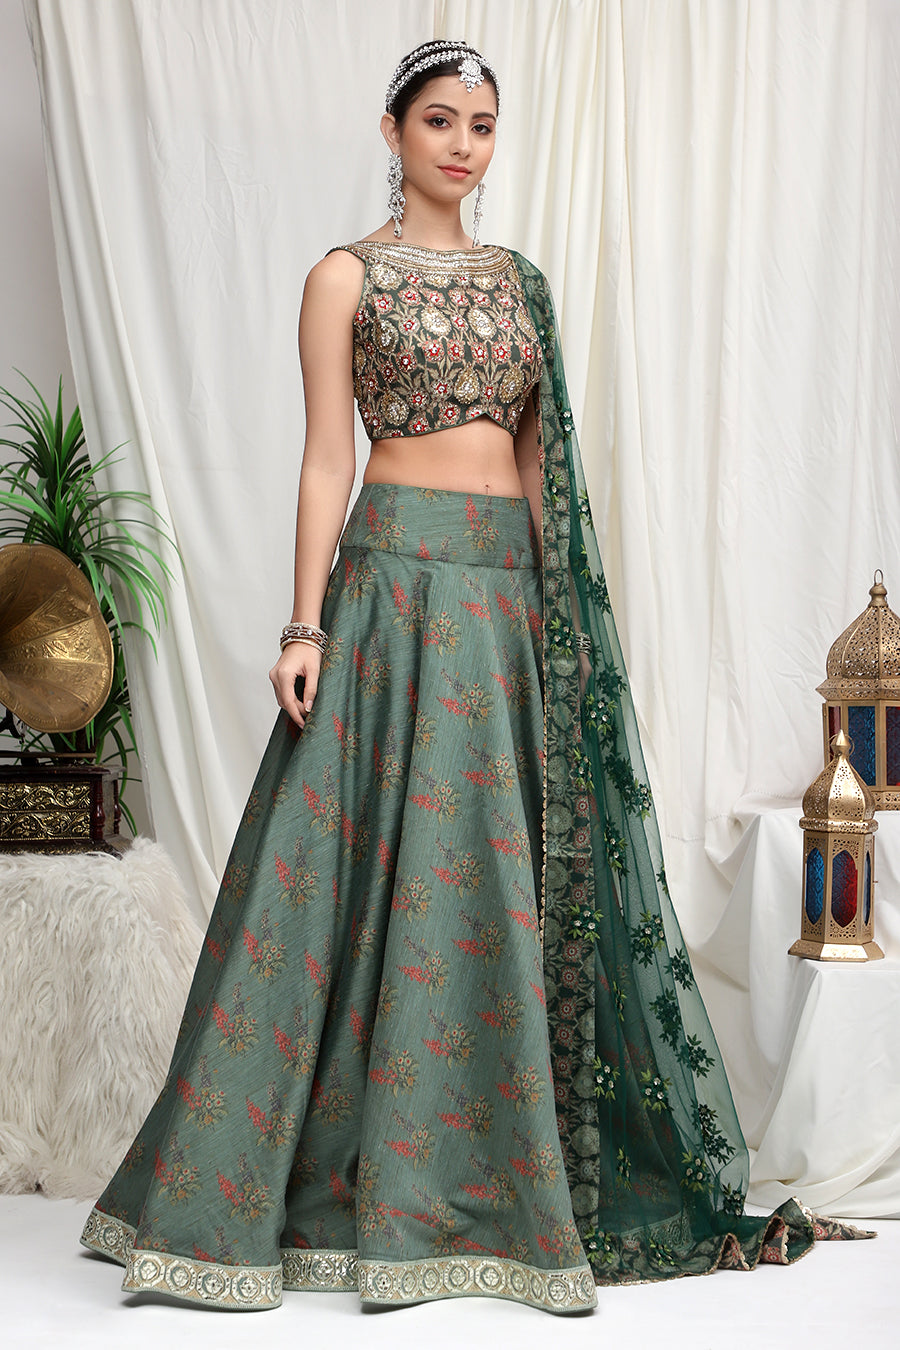 Green Net Fabric With Embroidered Lehenga Choli Lc 54 at 2500.00 INR in  Surat | Brightwin Fashion